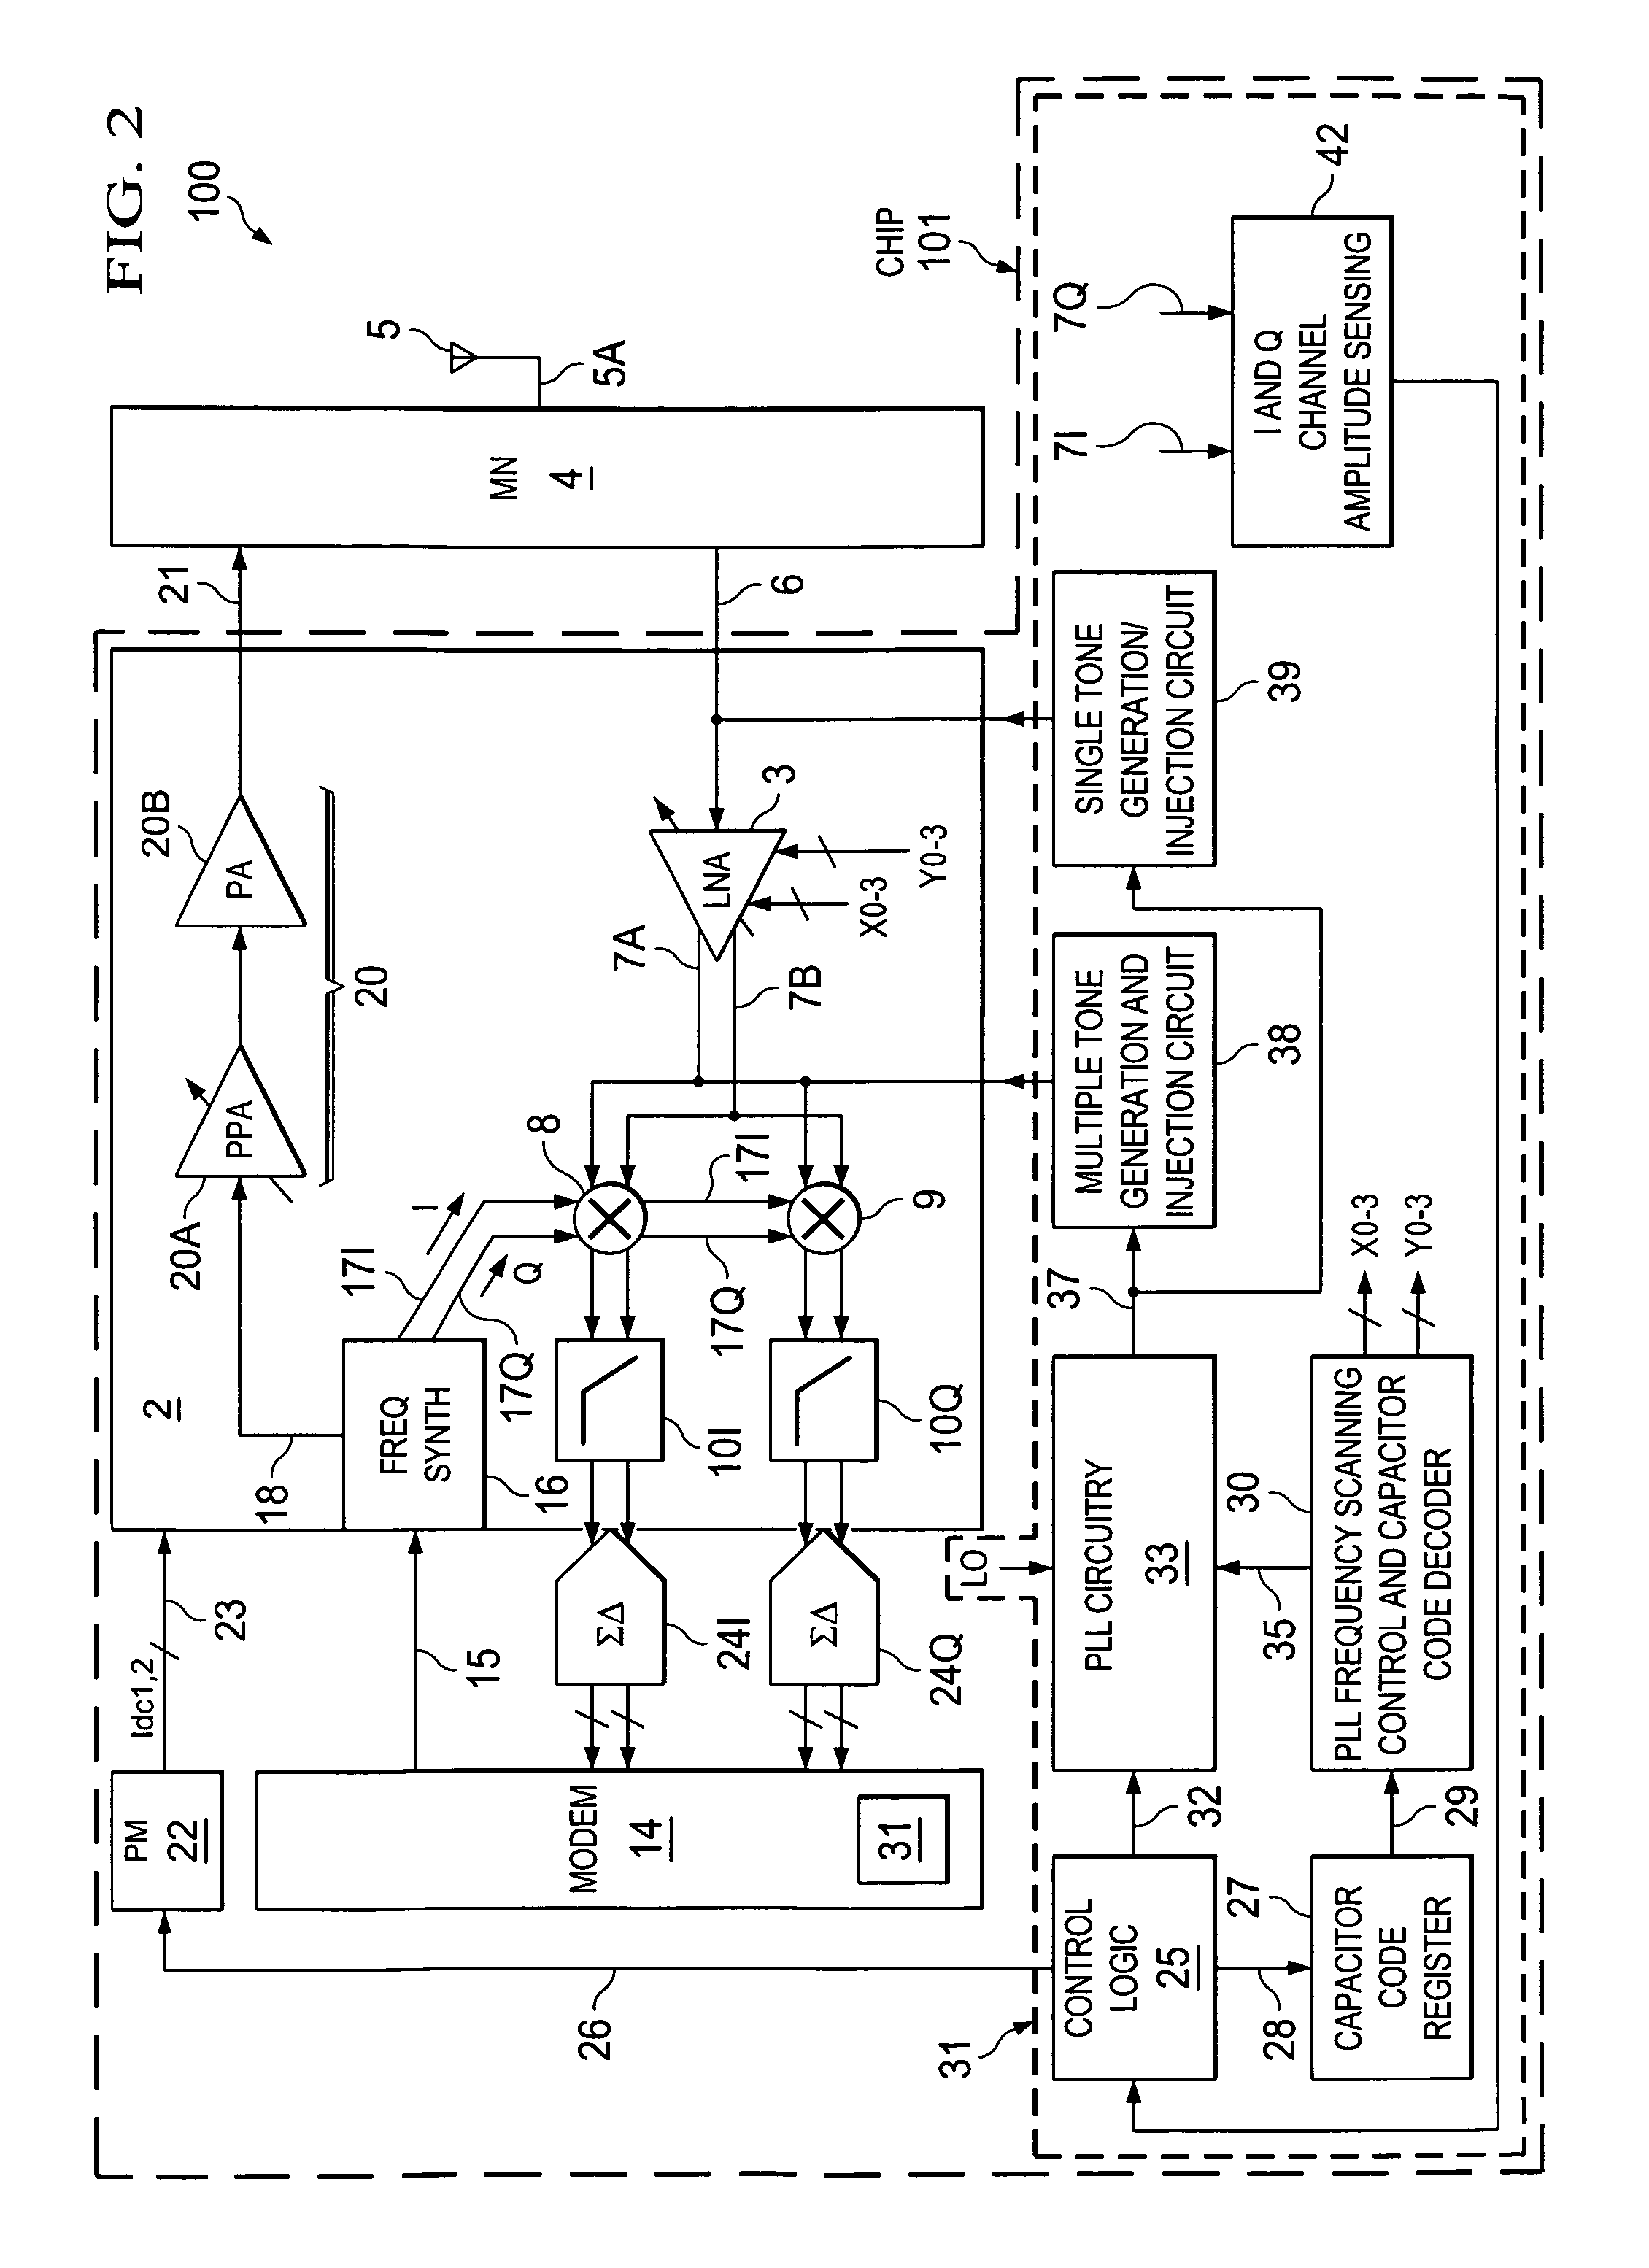 Built in self test and method for RF transceiver systems